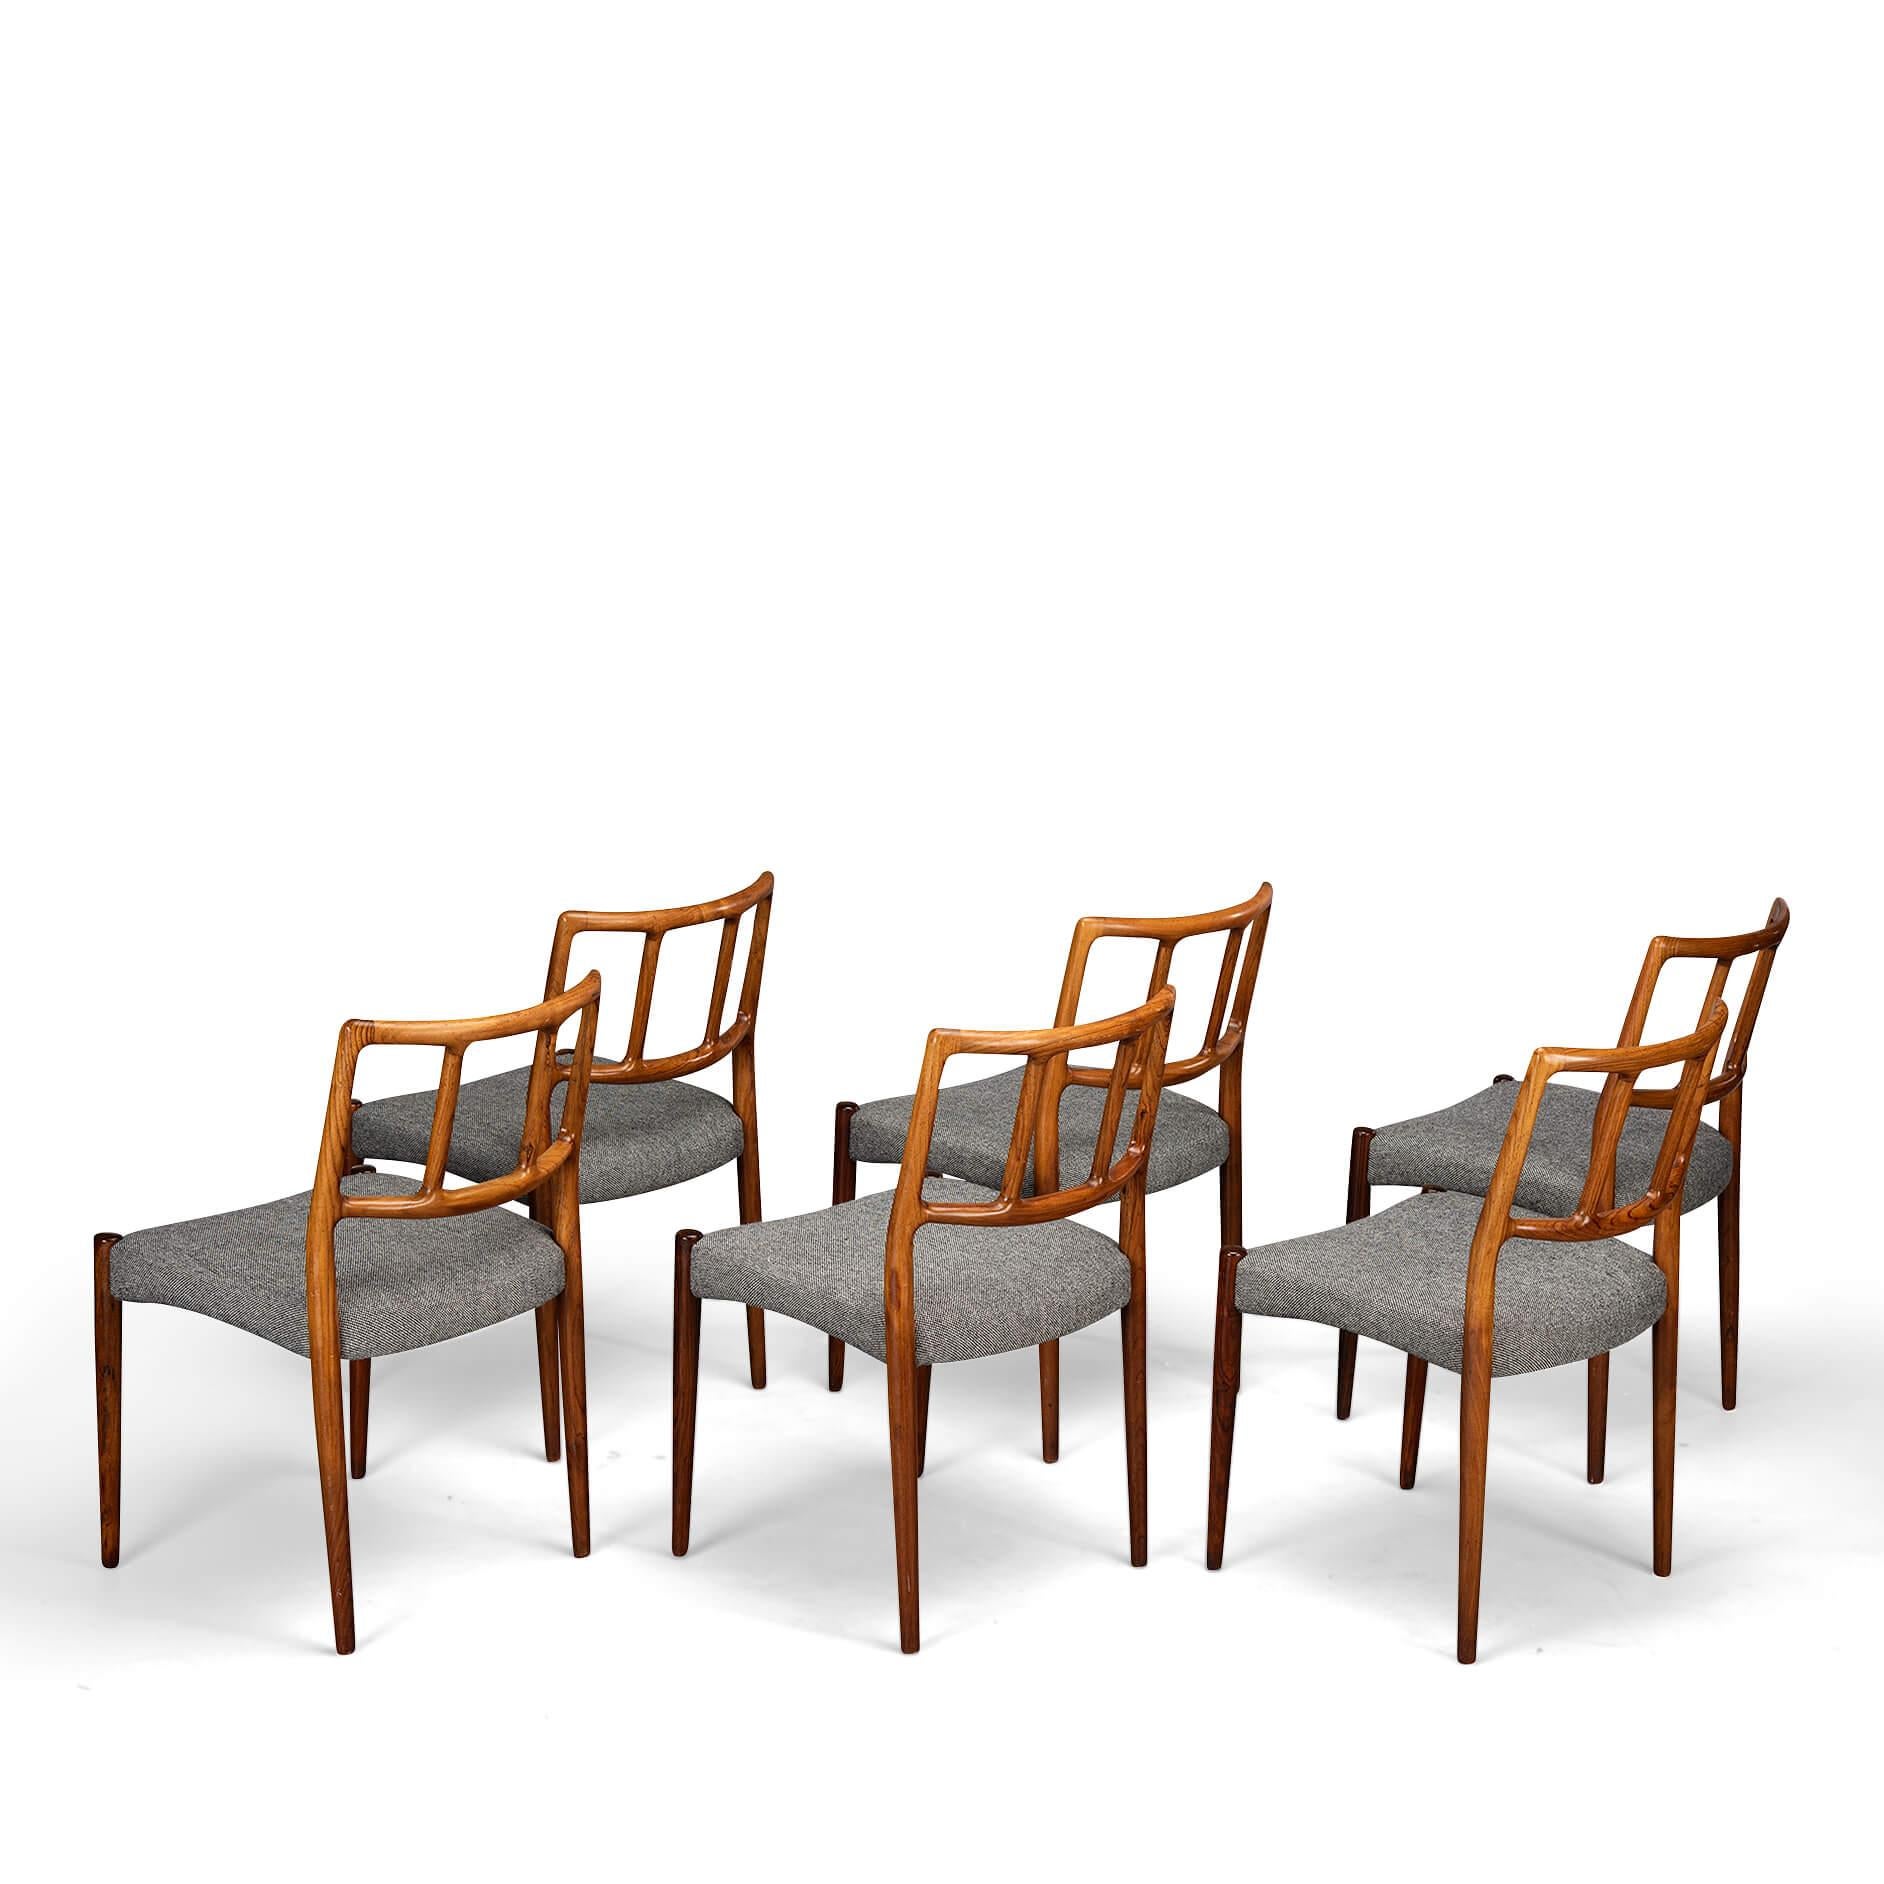 Mid-20th Century Reupholstered Rosewood Dining Chair by Johannes Andersen for Uldum, Set of 6 For Sale